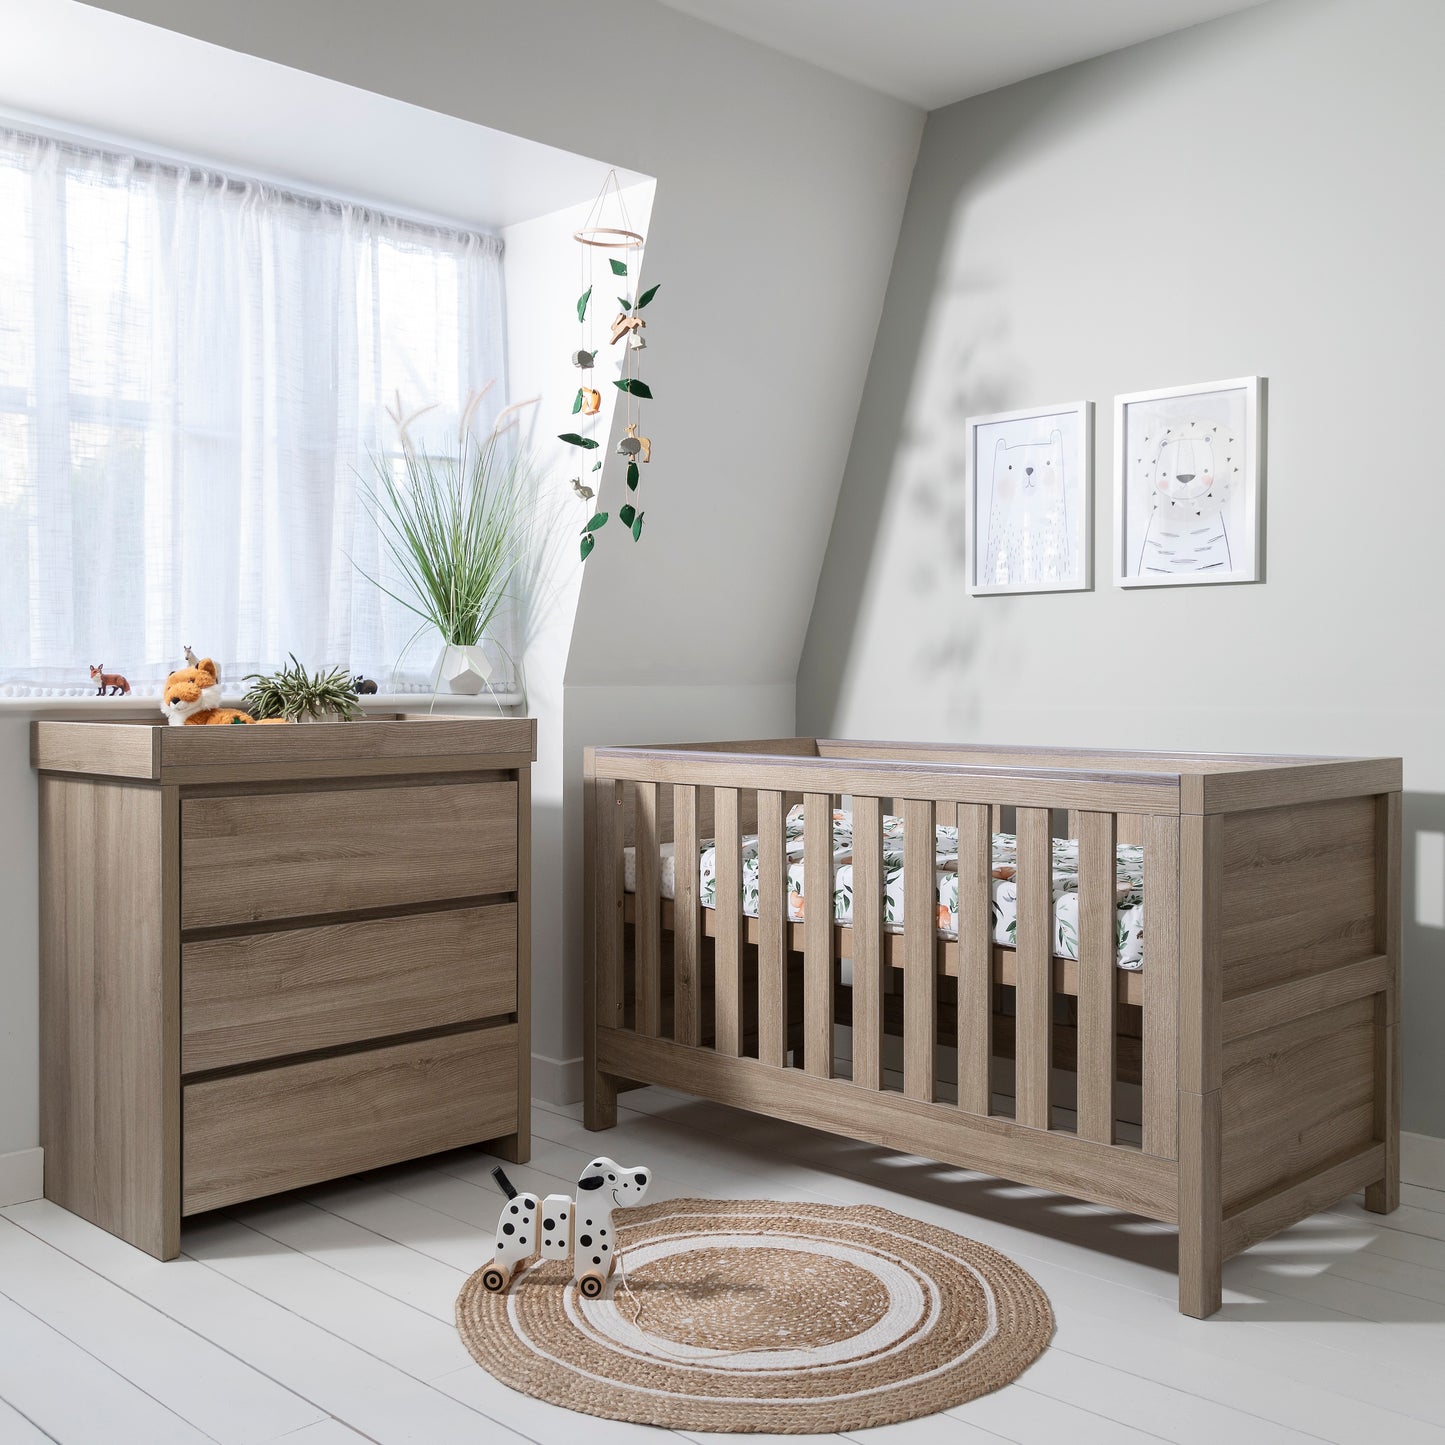 Tutti Bambini Modena 2 Piece Set with Cot Bed and Dresser Changer